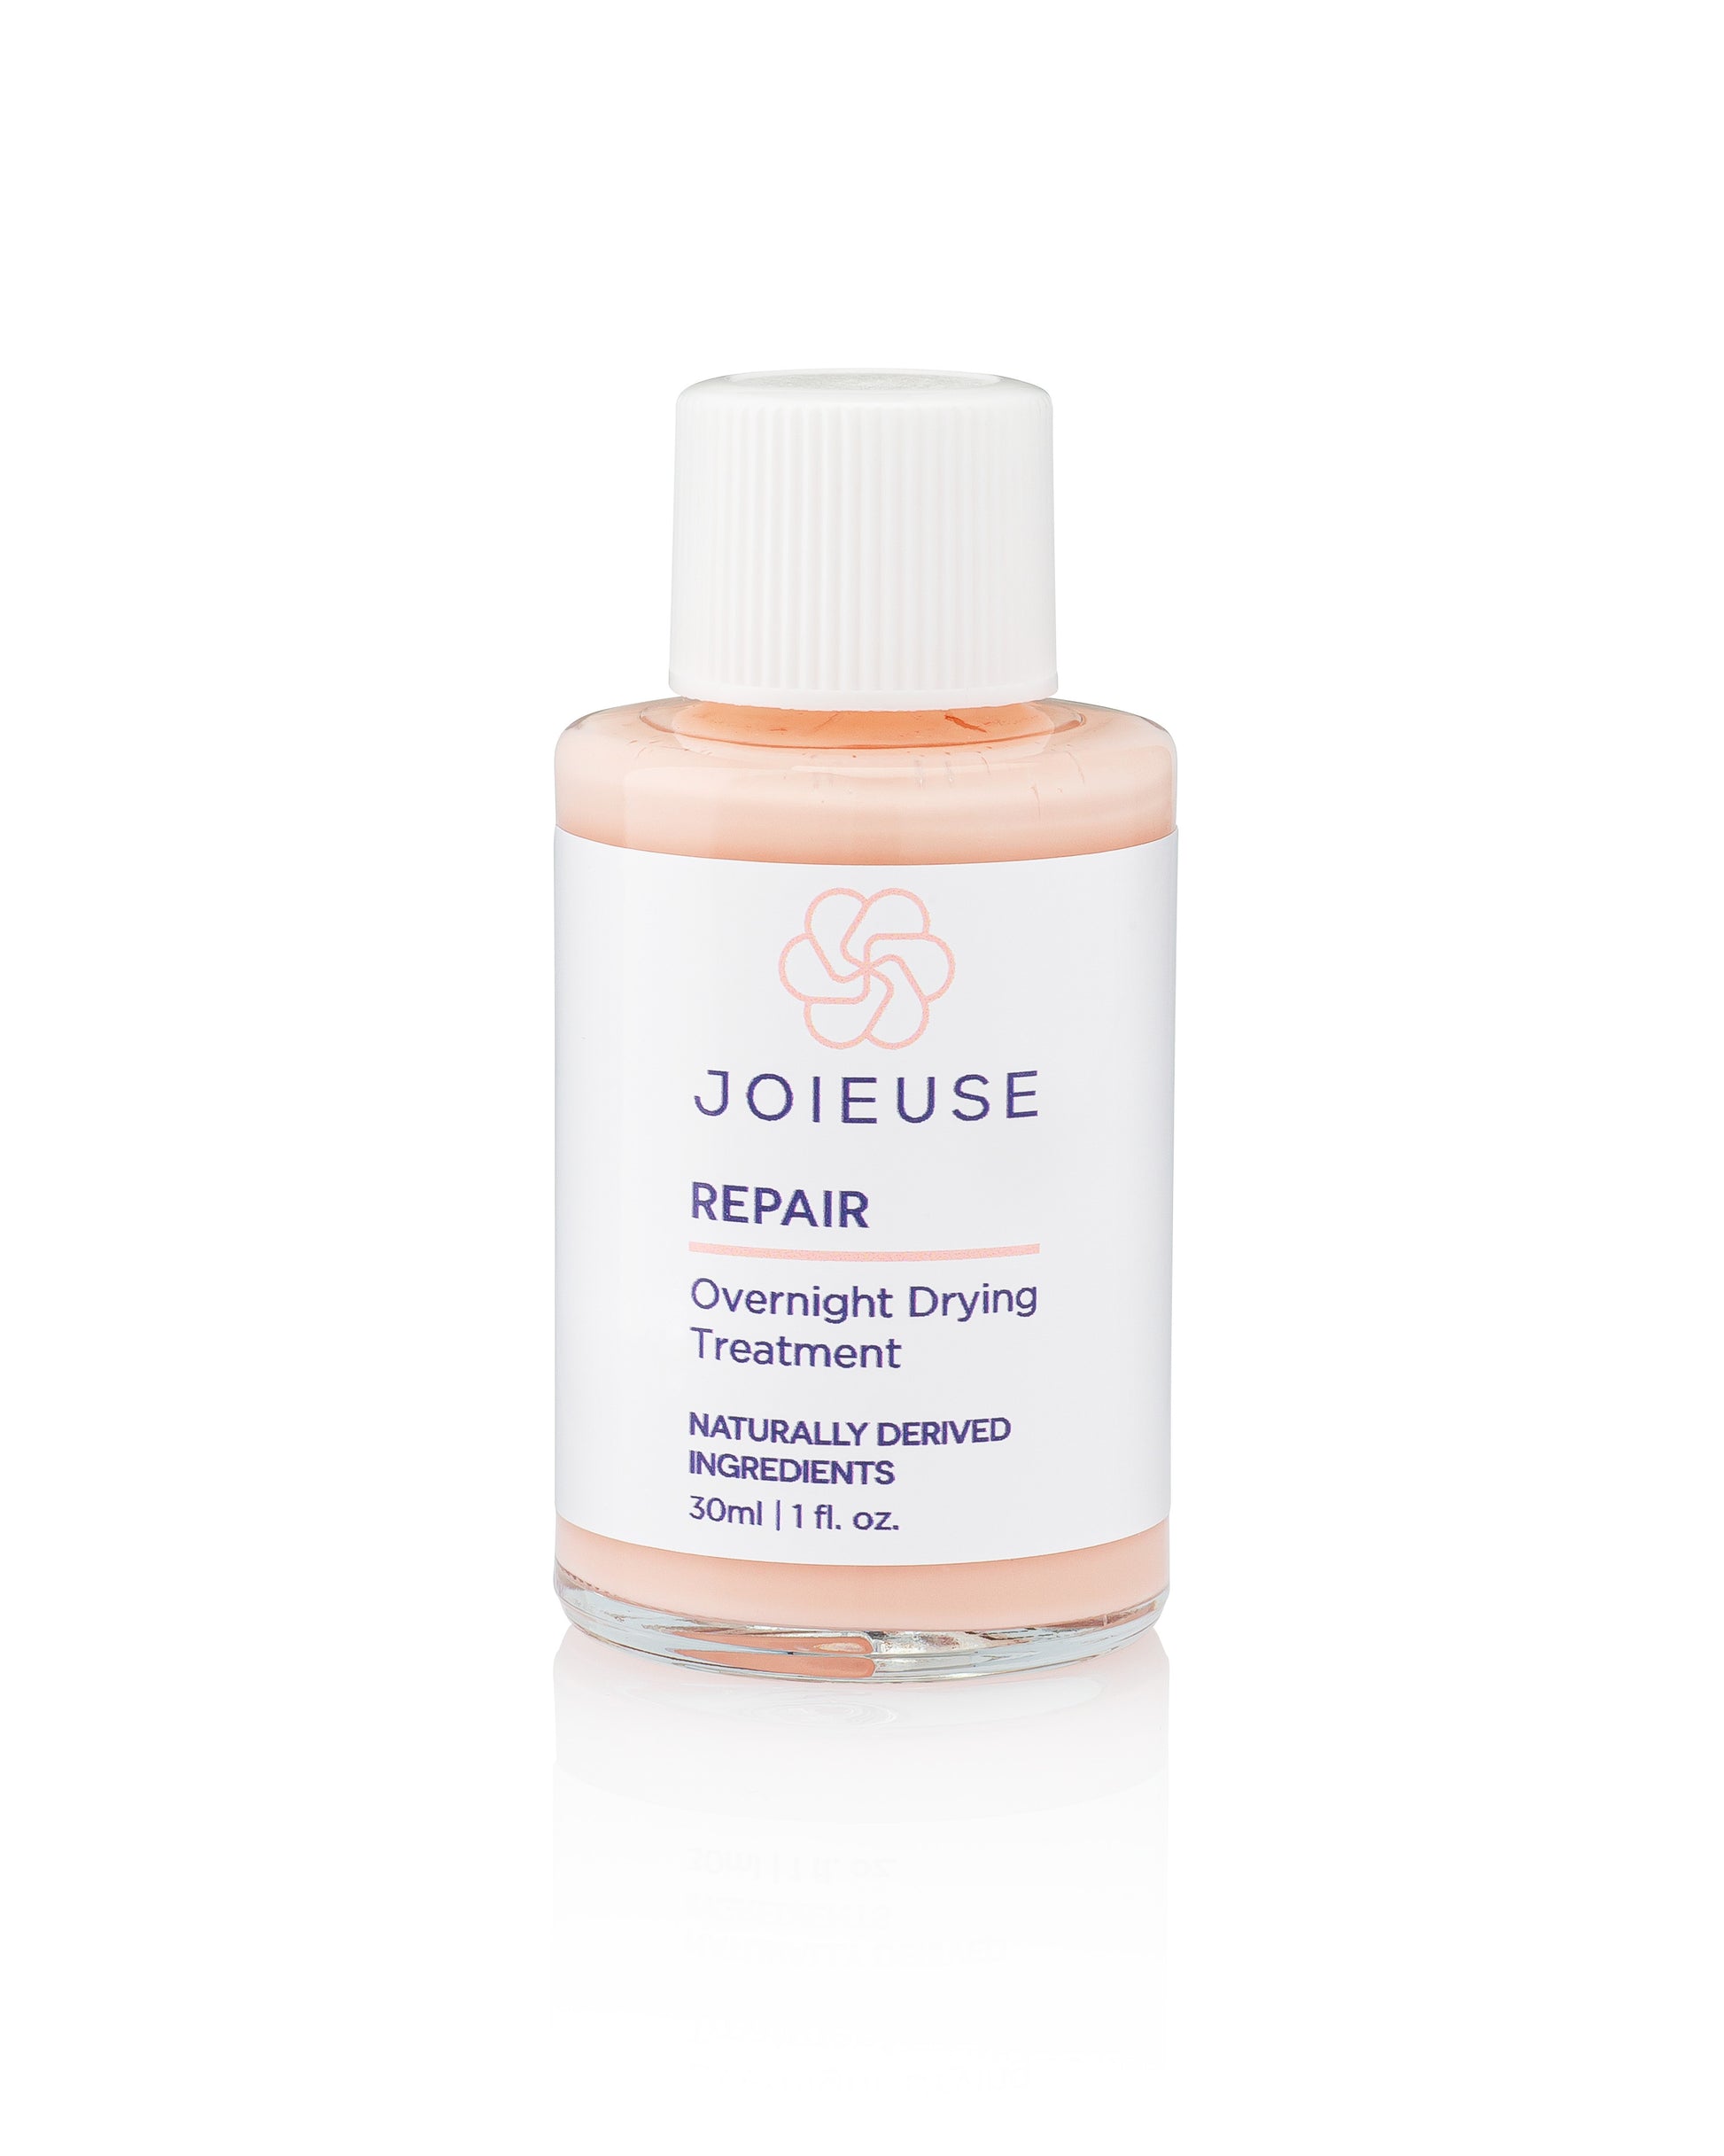 Joieuse Overnight Drying Repair Treatment for Active Blemishes